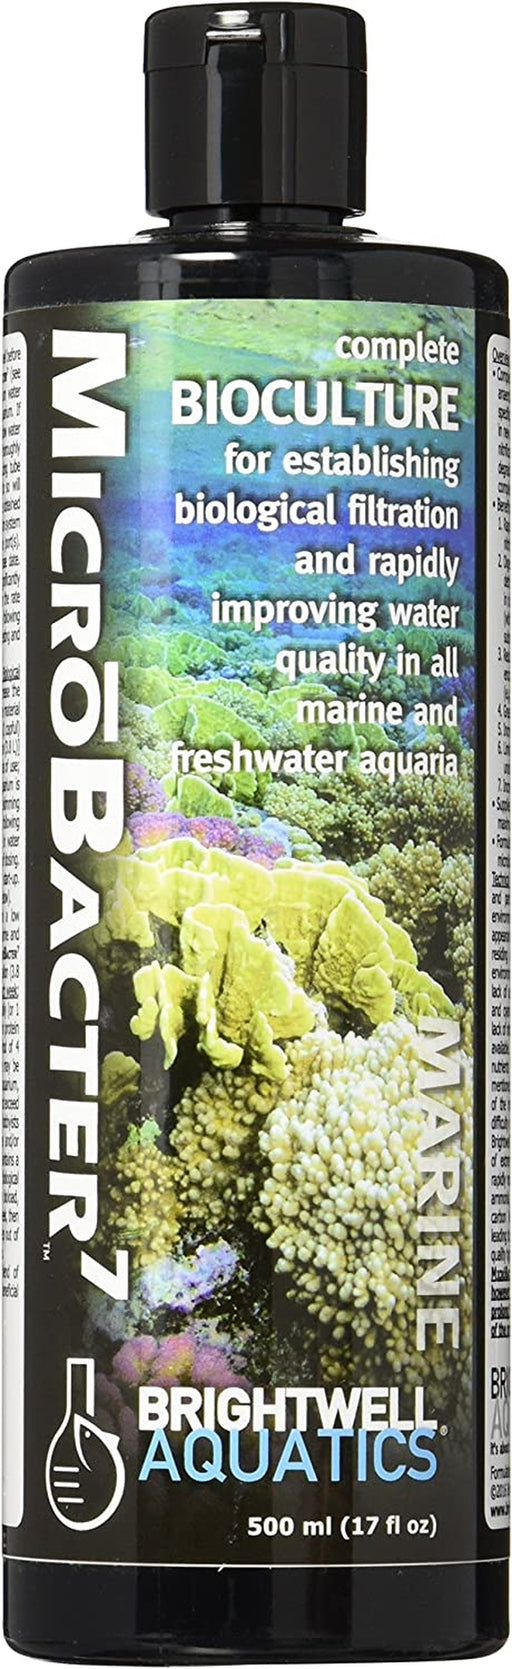 Microbacter7 - Bacteria & Water Conditioner for Fish Tank or Aquarium, Populates Biological Filter Media for Saltwater and Freshwater Fish, 500Ml